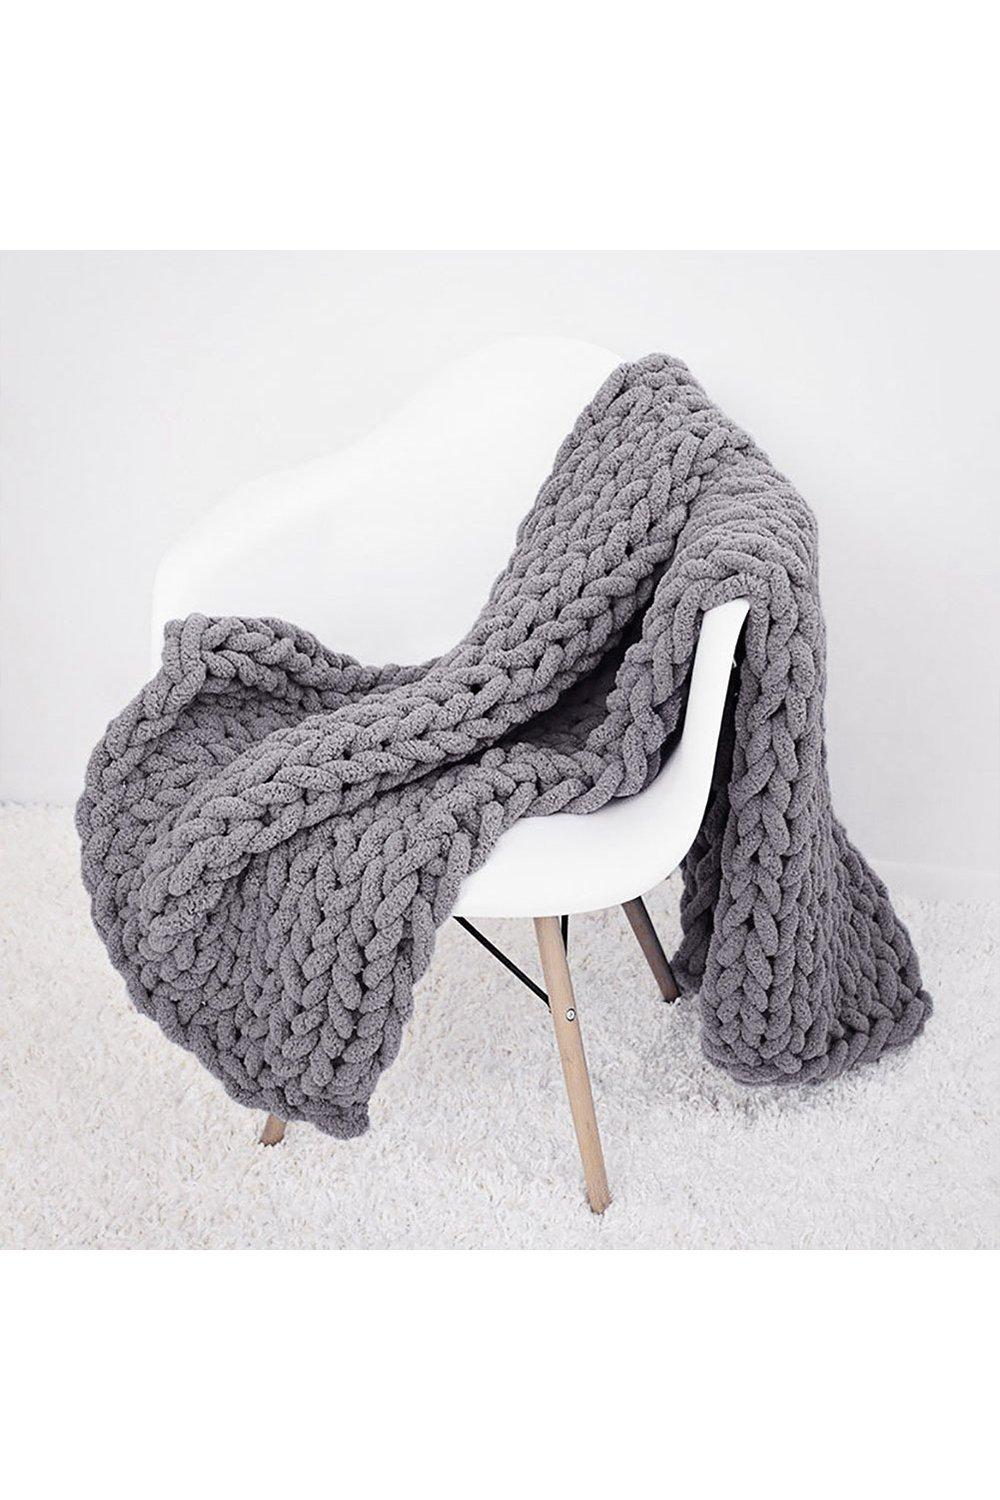  Chunky Knit Throw Blanket Soft Cozy Chenille Casual Handwoven  Blanket for Bed Sofa Chair Home Decor (White, 60 × 80) : Home & Kitchen